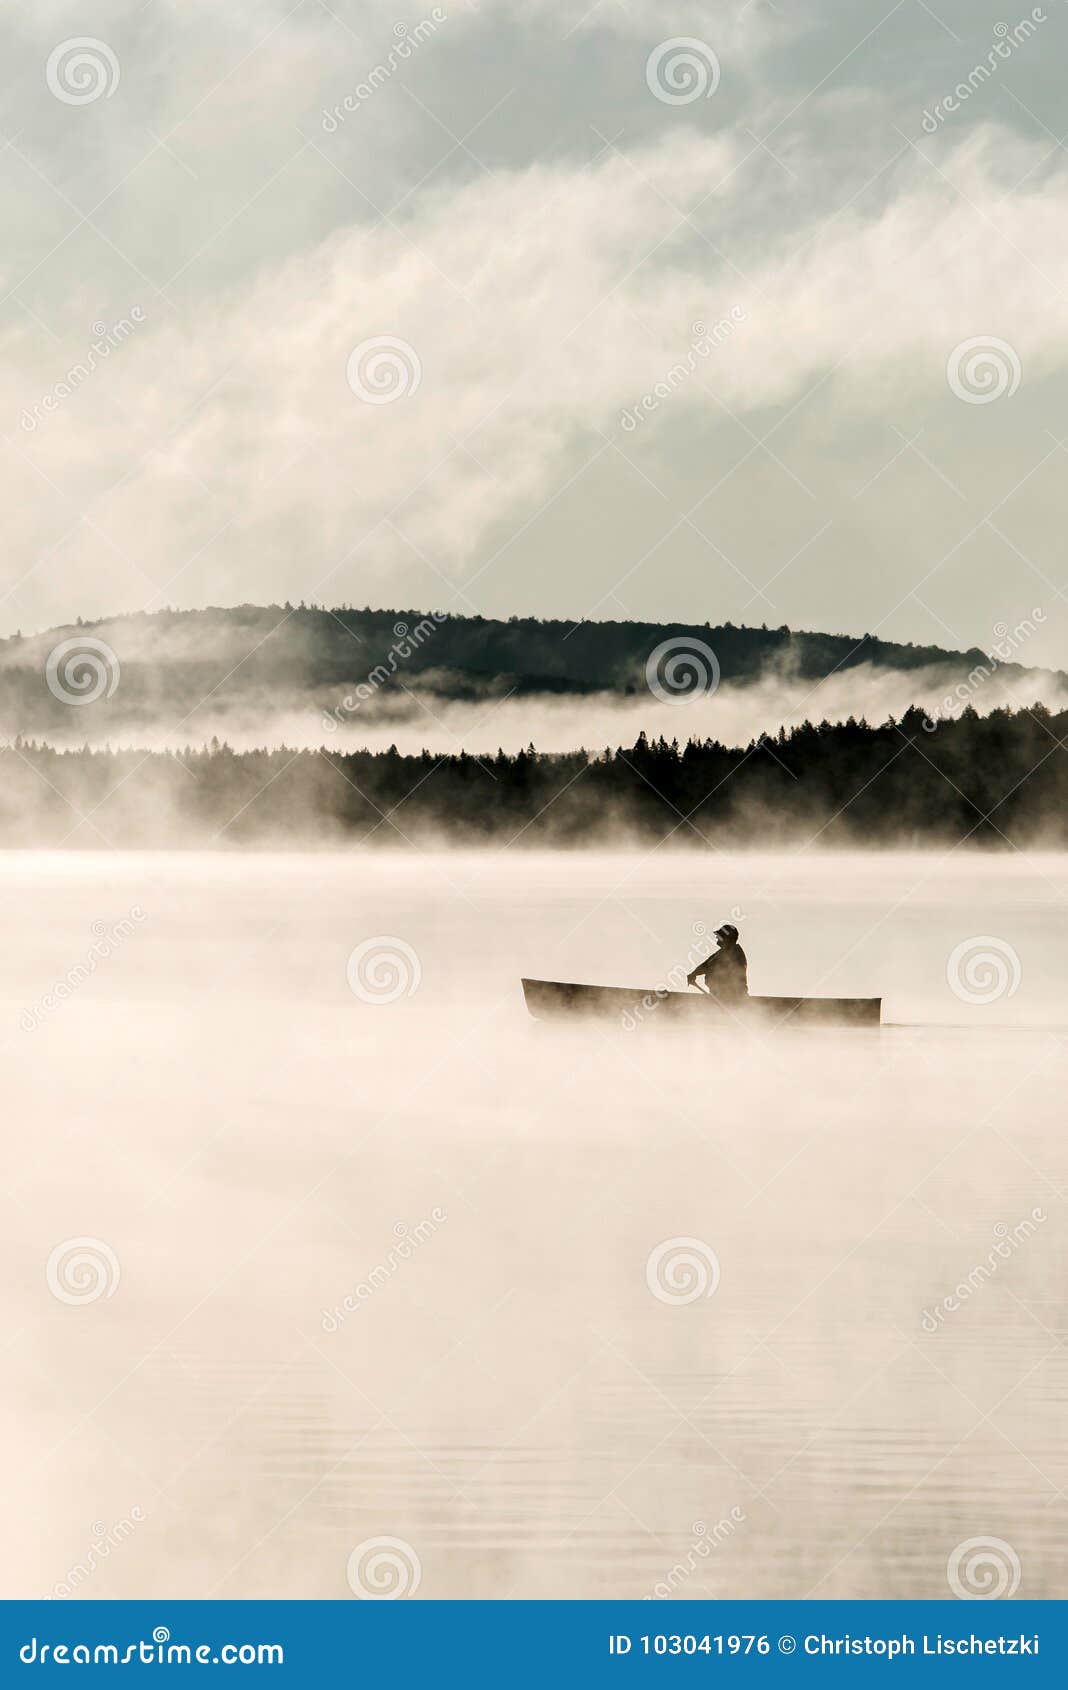 canada ontario lake of two rivers canoe canoes foggy water